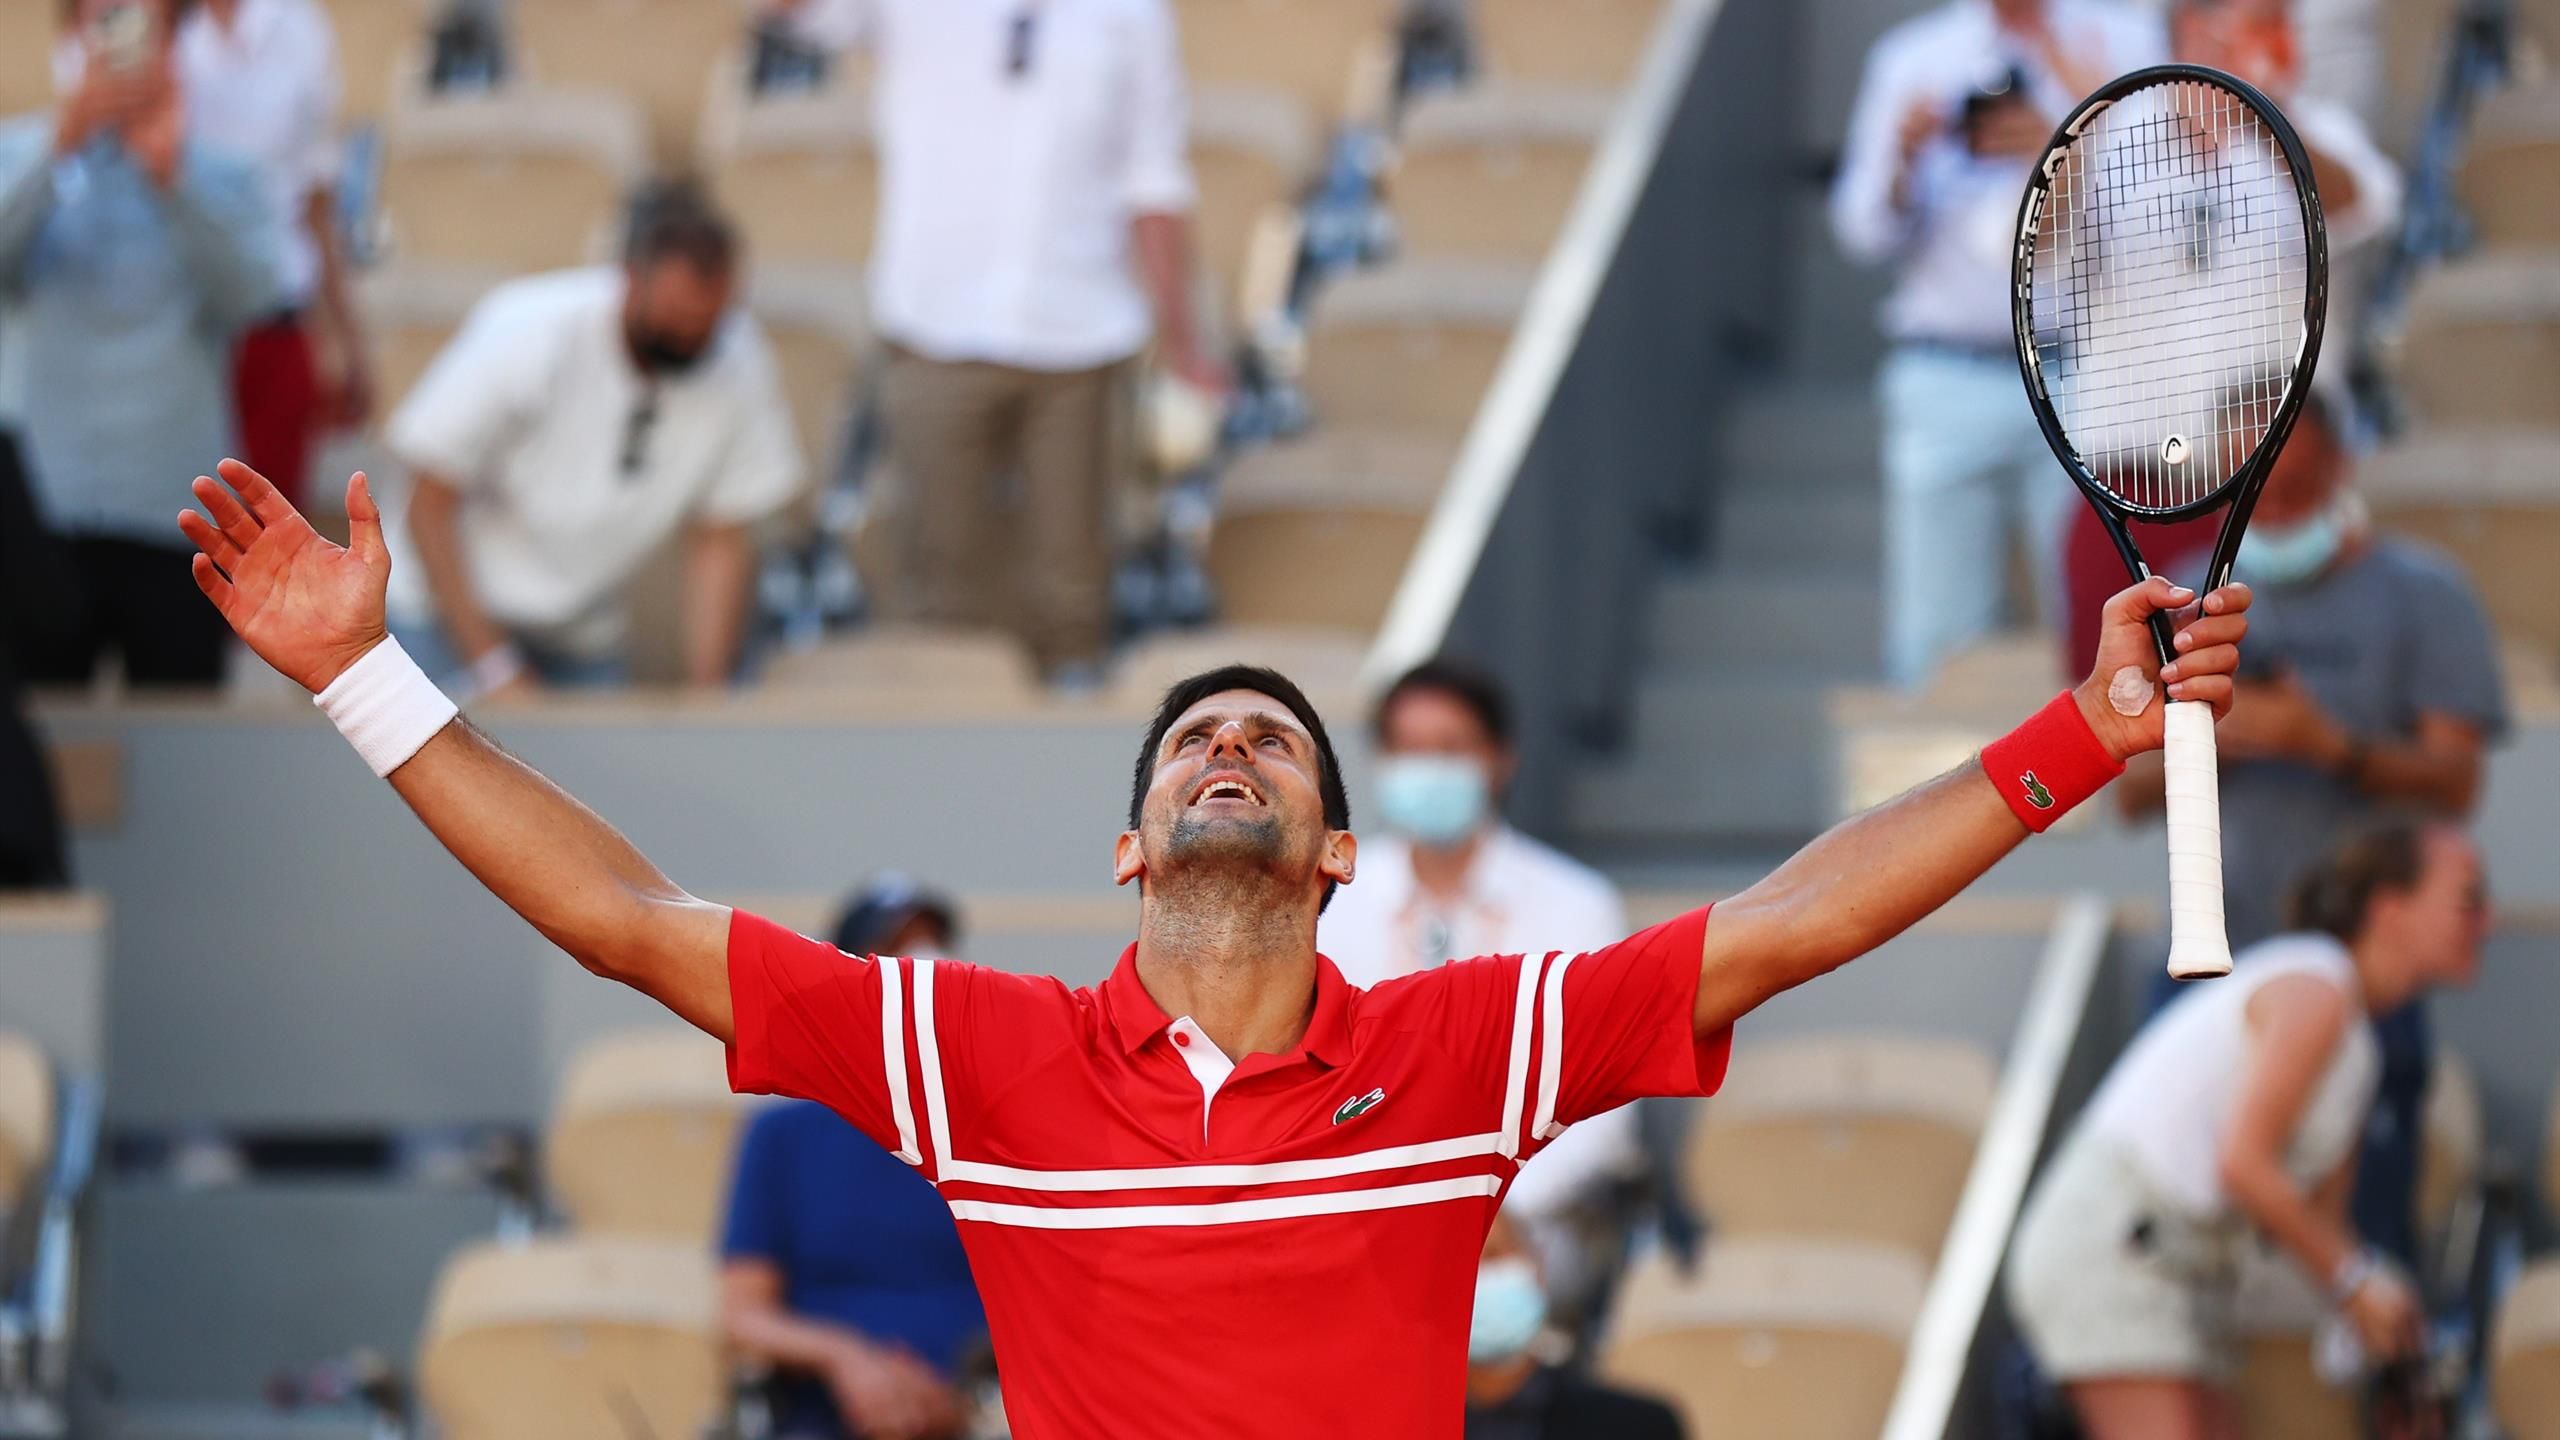 French Open mens final as it happened - Novak Djokovic edges Stefanos Tsitsipas in five-sets to win a 19th Grand Slam